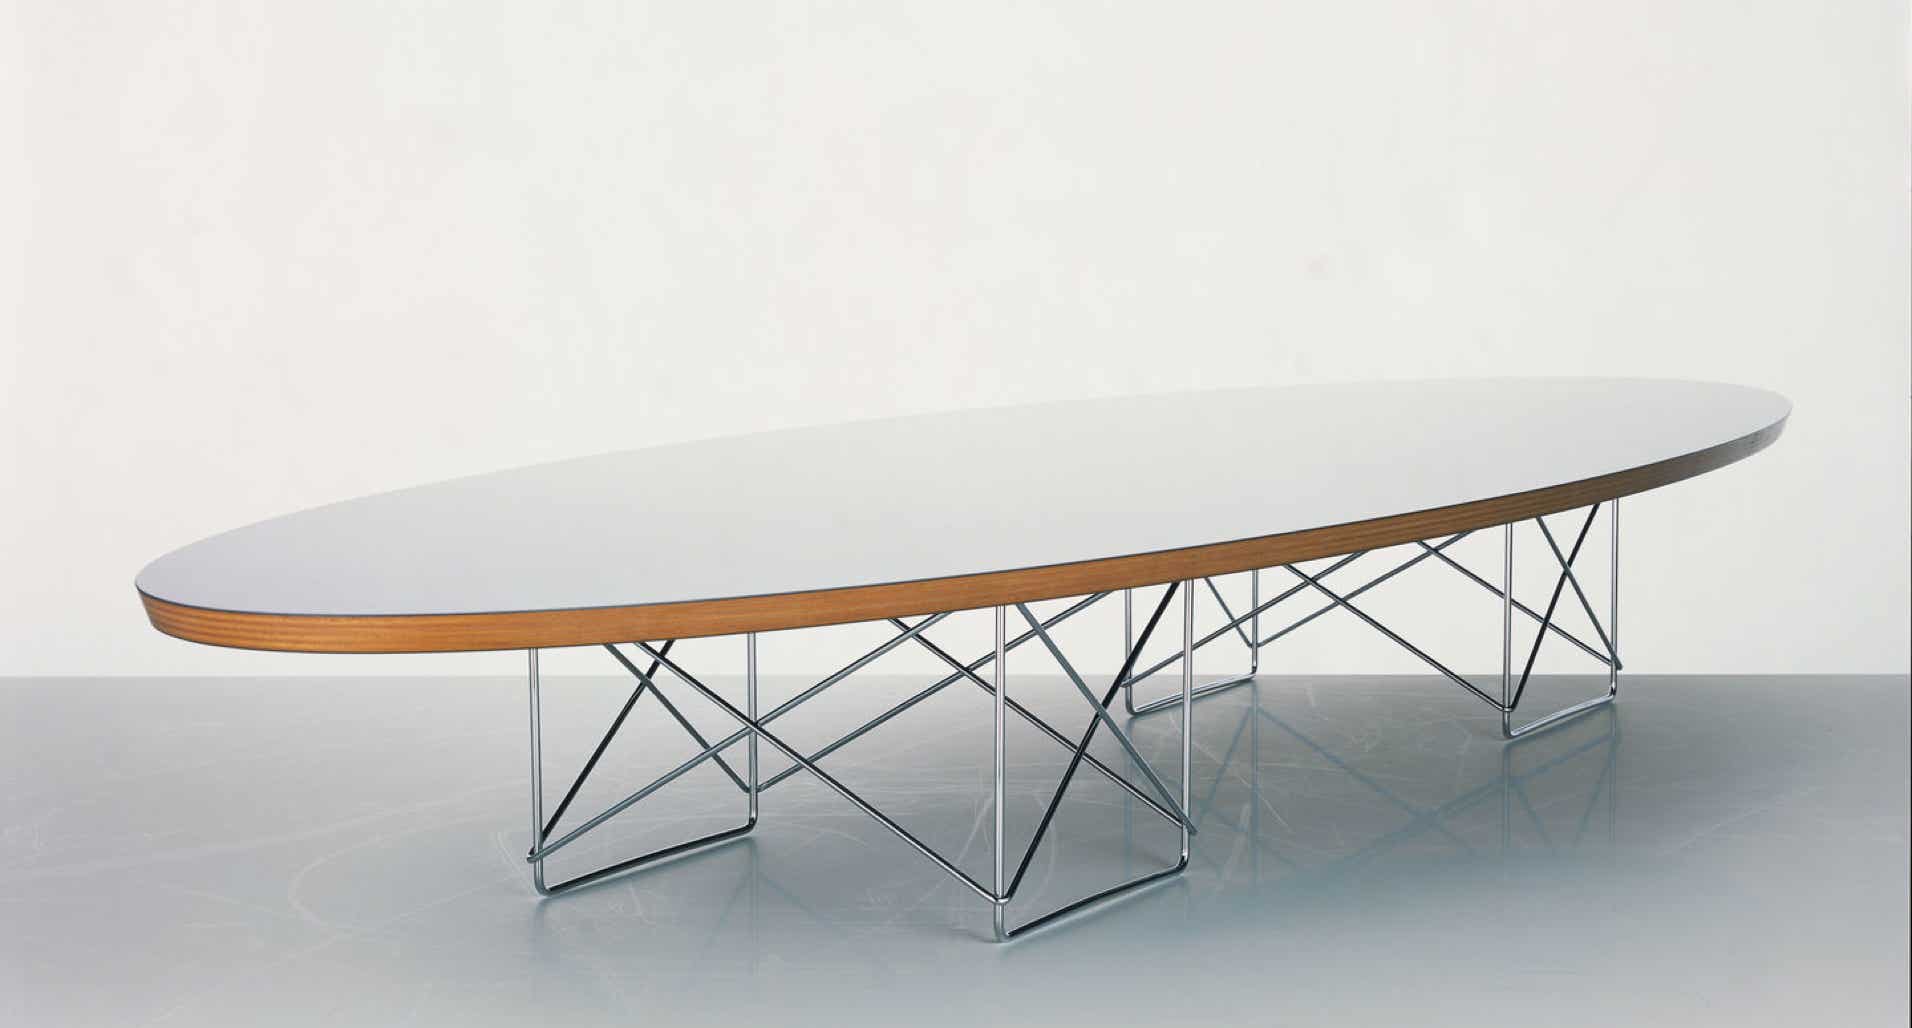 Table Elliptique ETR Charles & Ray Eames, 1951